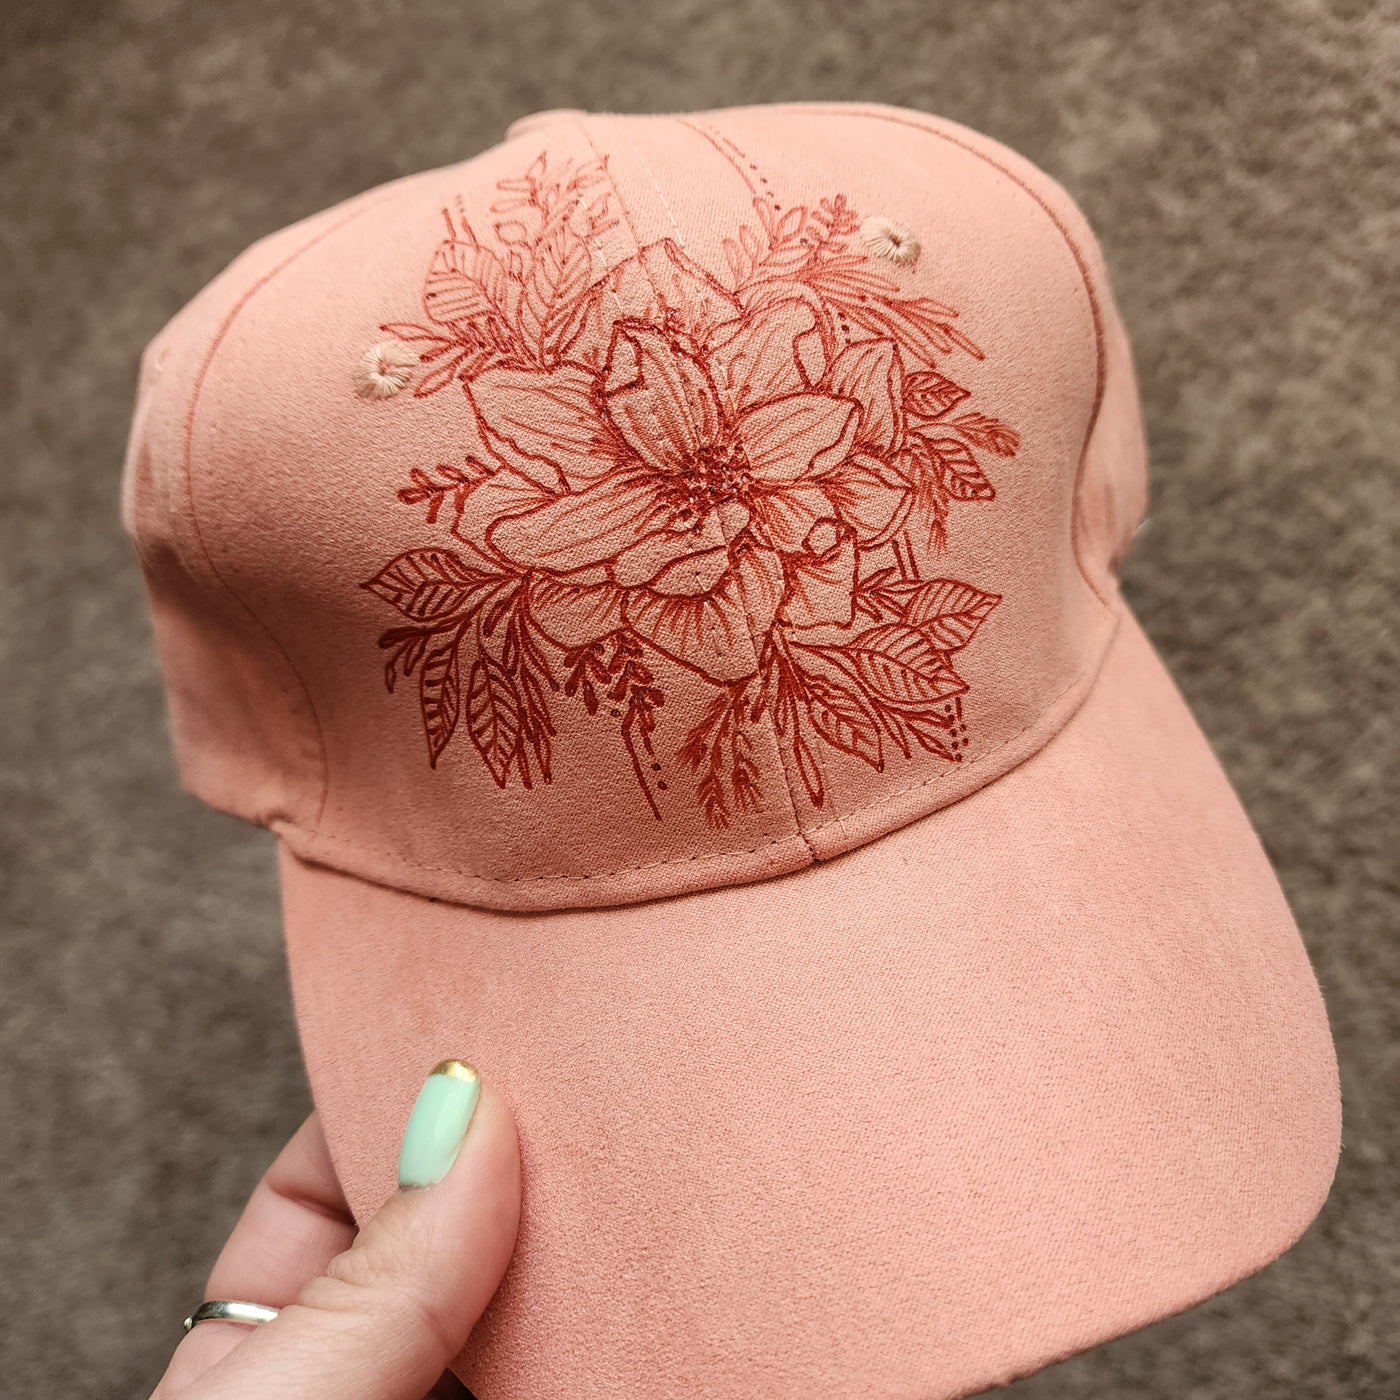 Lined Magnolia || Dark Pastel Pink/Coral Baseball Style Suede Hat || Freehand Burned